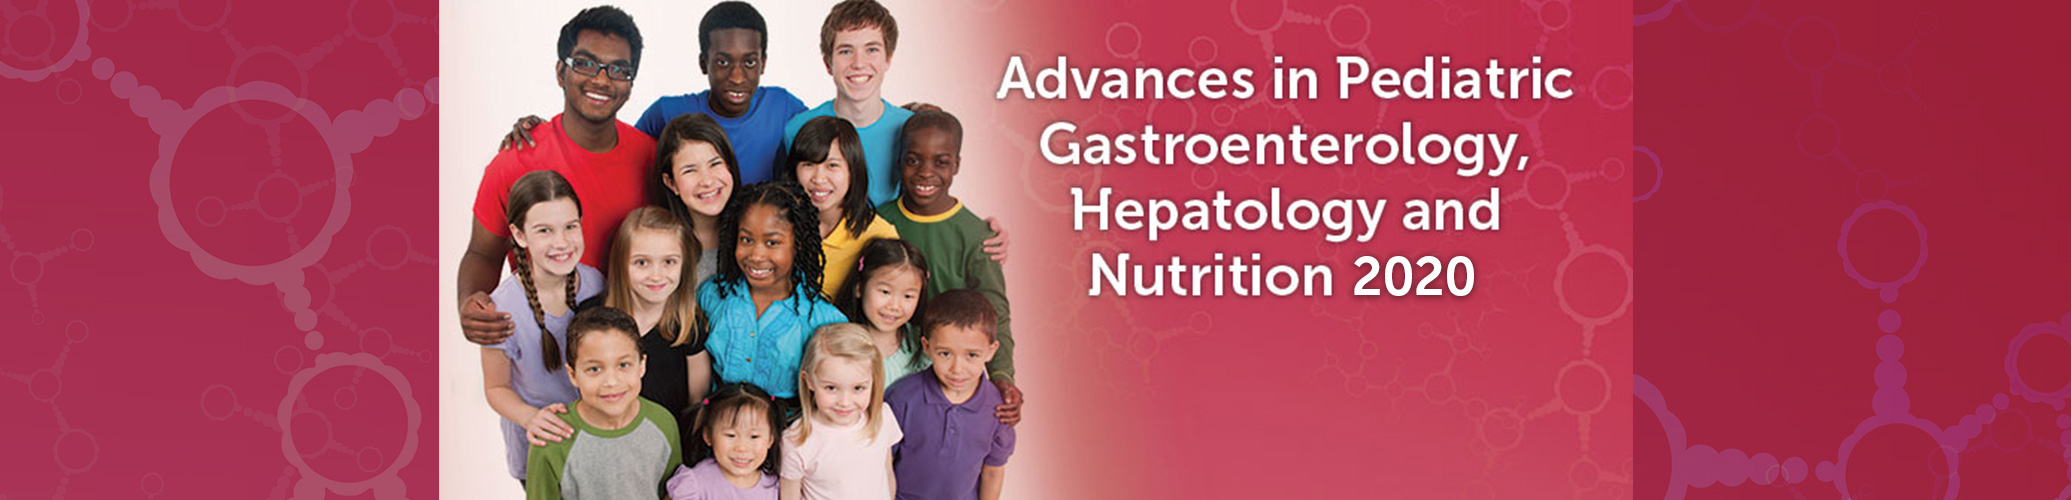 CANCELLED: Advances in Pediatric Gastroenterology, Hepatology and Nutrition 2020 Banner